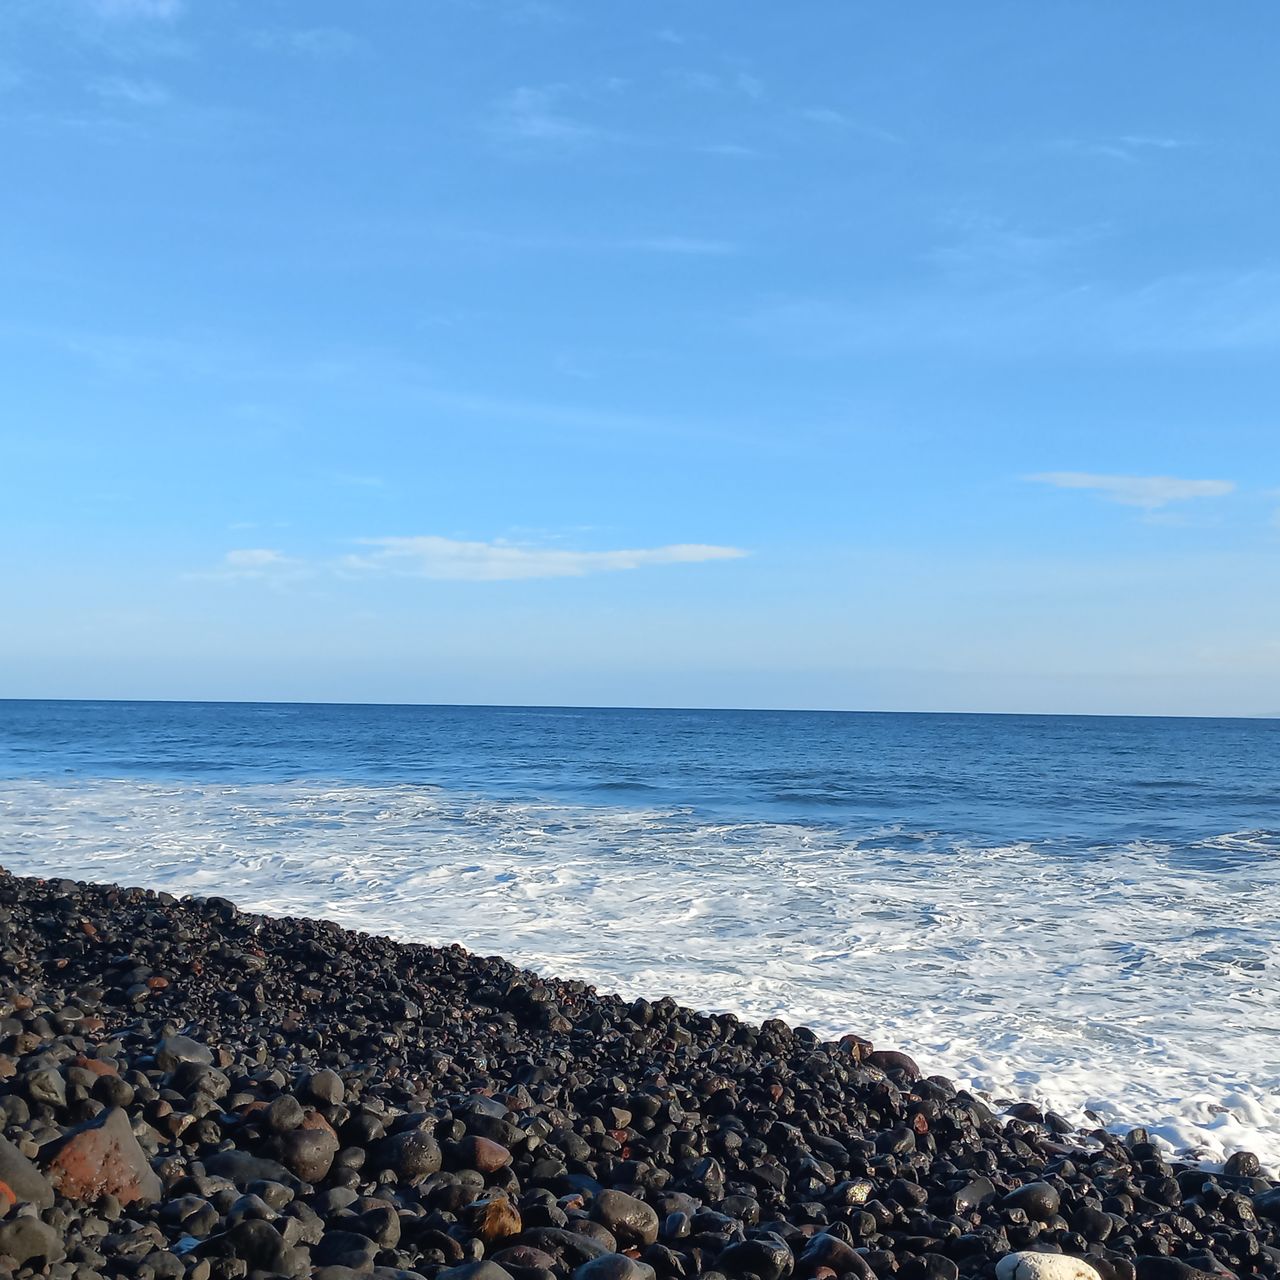 sea, water, sky, horizon over water, horizon, land, beach, shore, beauty in nature, ocean, rock, scenics - nature, body of water, nature, tranquility, wave, tranquil scene, coast, sand, blue, day, pebble, no people, cloud, stone, idyllic, outdoors, non-urban scene, motion, wind wave, sunlight